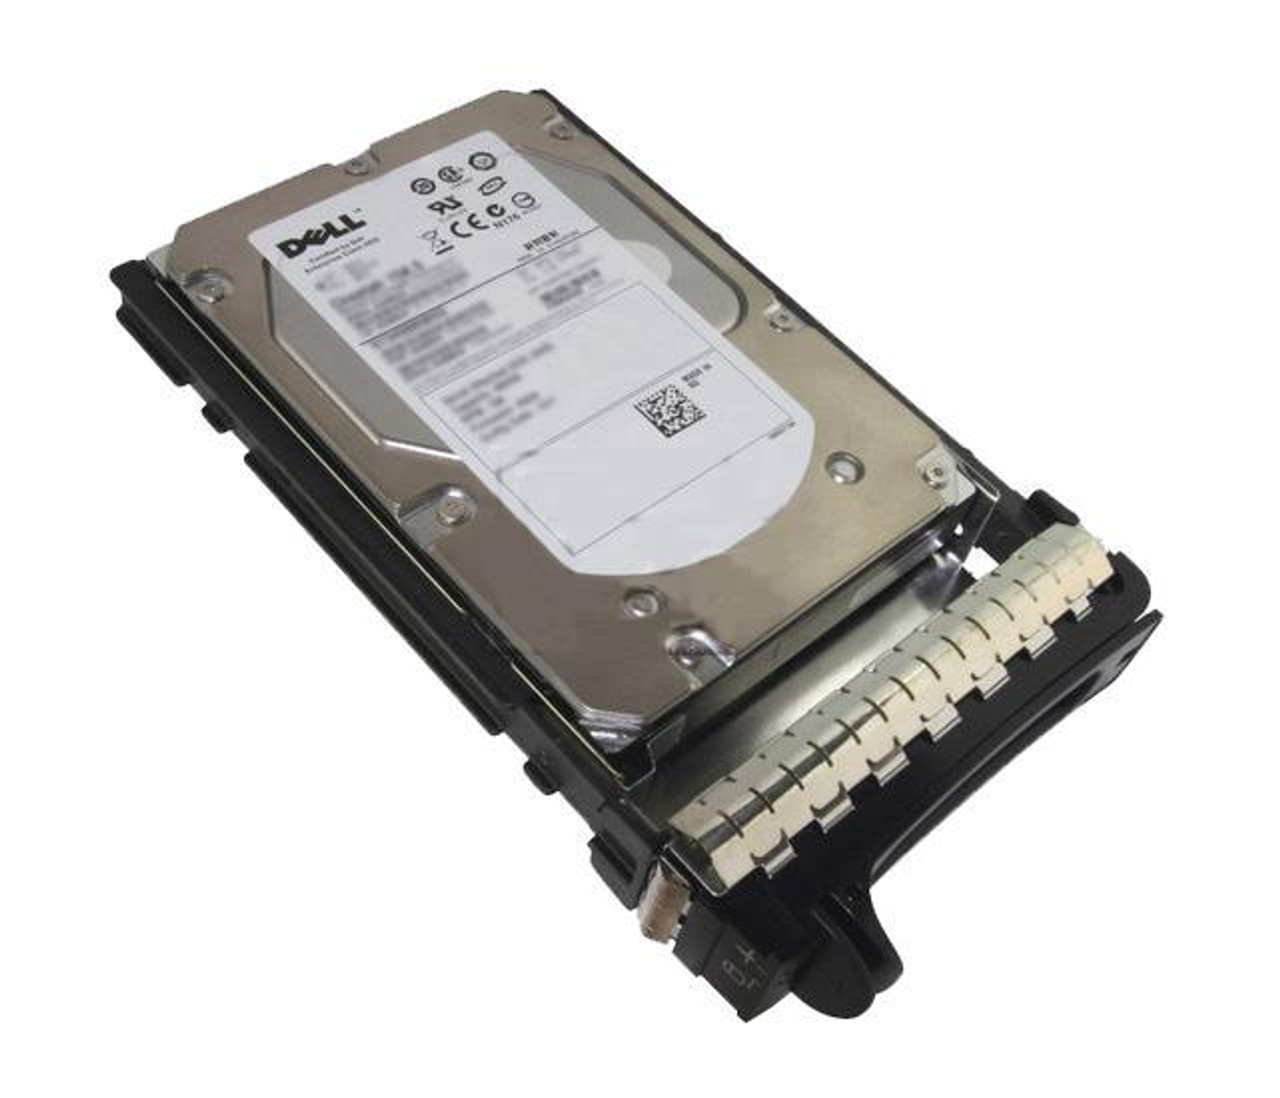 SSI-3F773 Dell 36GB 15000RPM Ultra-160 SCSI 80-Pin Hot Swap 8MB Cache 3.5-inch Internal Hard Drive with Tray